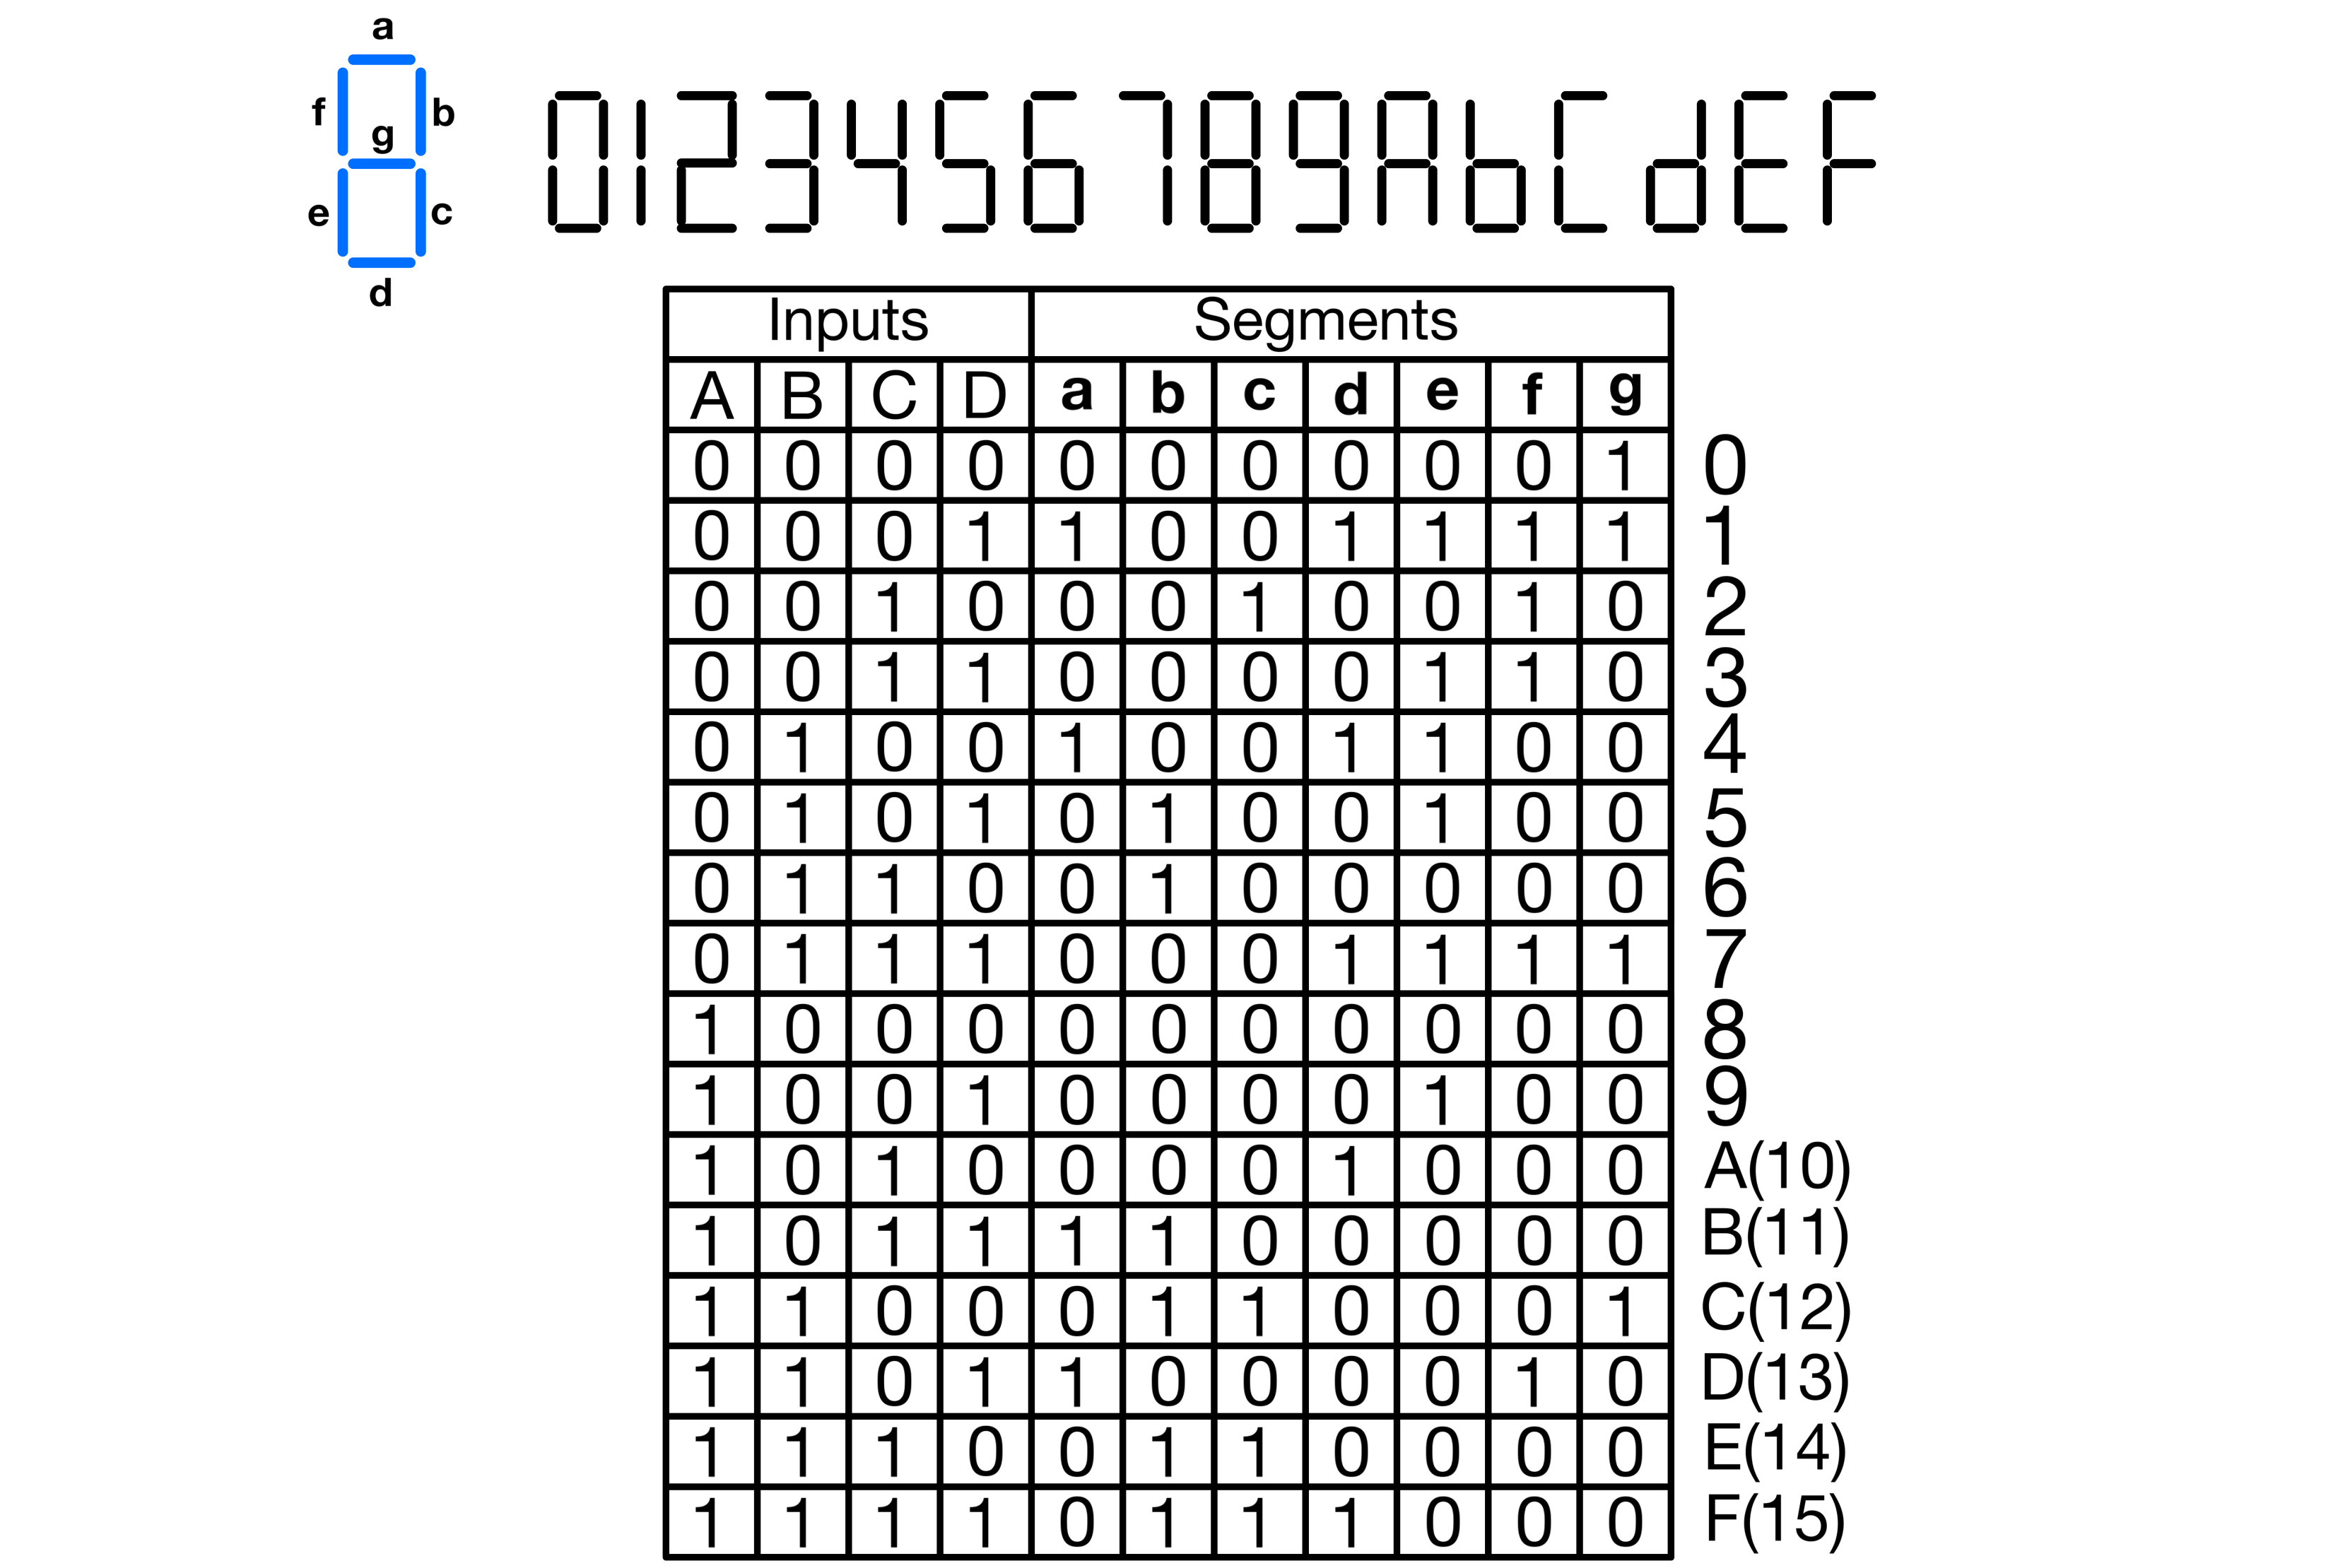 Figure 2: Segments State for Every Digit